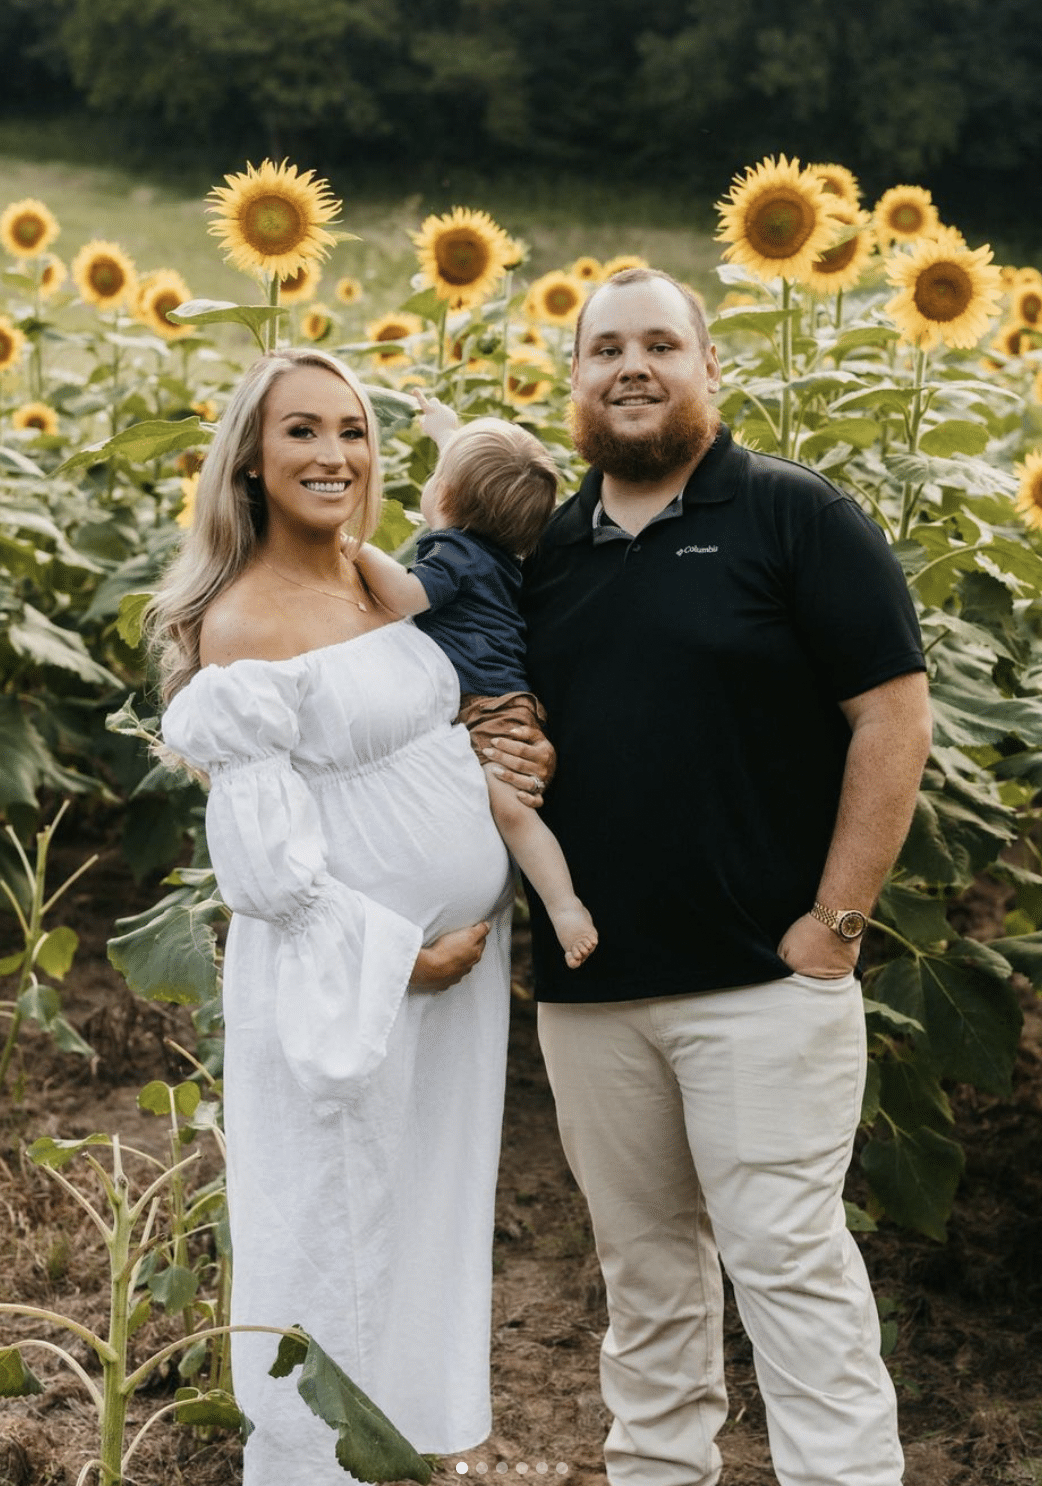 Luke Combs and his family.